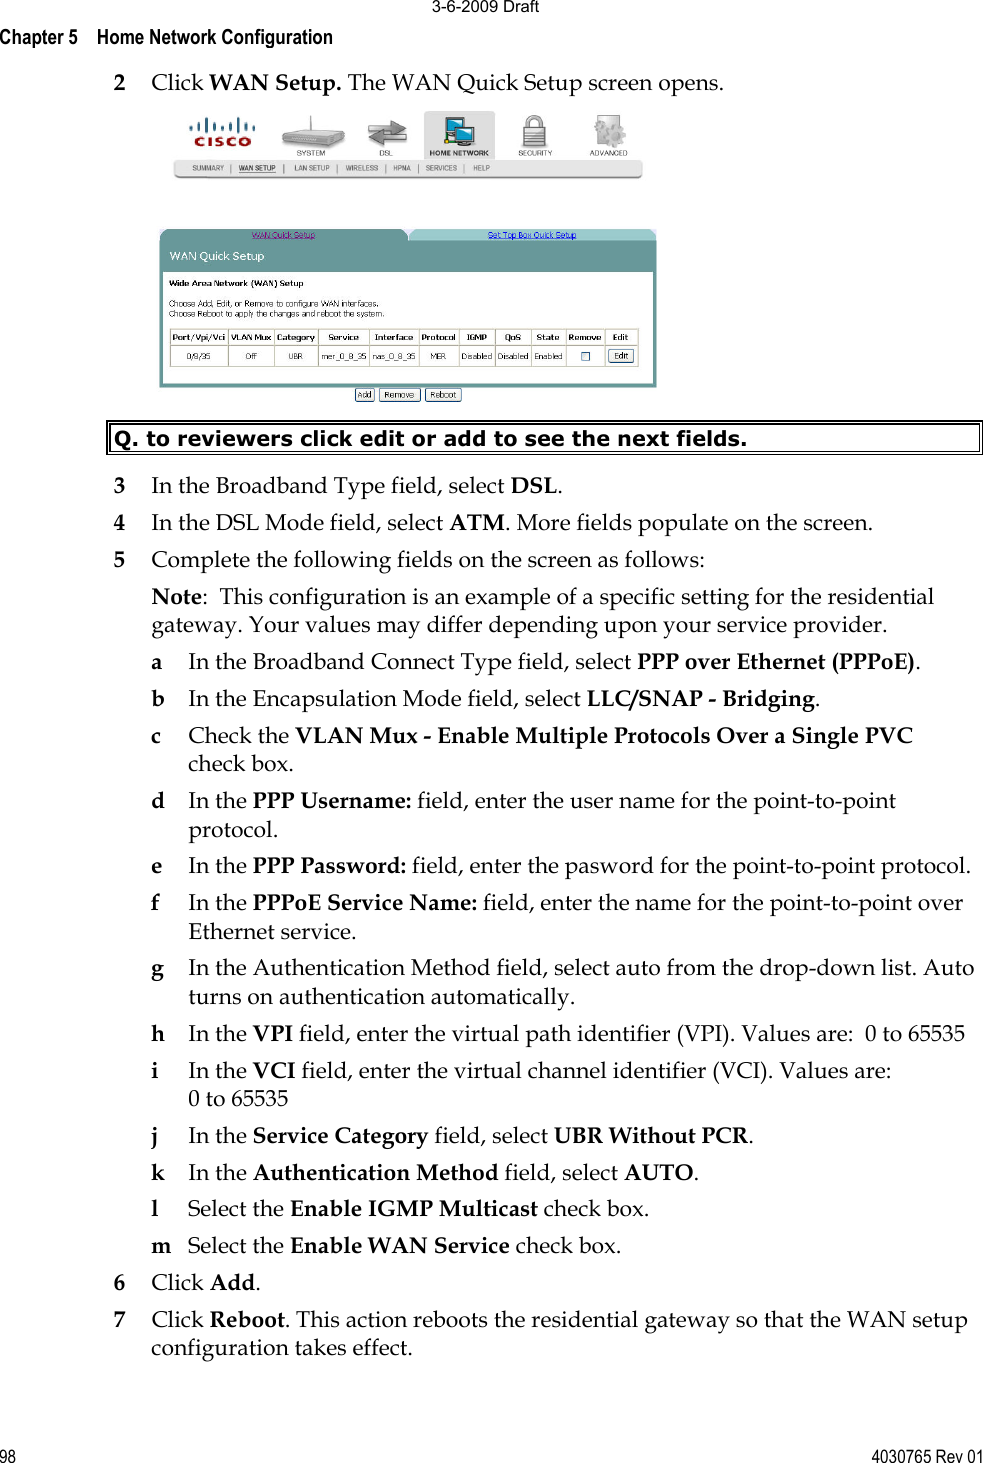 Chapter 5    Home Network Configuration98 4030765 Rev 012Click WAN Setup. The WAN Quick Setup screen opens. Q. to reviewers click edit or add to see the next fields. 3In the Broadband Type field, select DSL. 4In the DSL Mode field, select ATM. More fields populate on the screen. 5Complete the following fields on the screen as follows: Note:  This configuration is an example of a specific setting for the residential gateway. Your values may differ depending upon your service provider. aIn the Broadband Connect Type field, select PPP over Ethernet (PPPoE). bIn the Encapsulation Mode field, select LLC/SNAP - Bridging. cCheck the VLAN Mux - Enable Multiple Protocols Over a Single PVCcheck box. dIn the PPP Username: field, enter the user name for the point-to-point protocol. eIn the PPP Password: field, enter the pasword for the point-to-point protocol. fIn the PPPoE Service Name: field, enter the name for the point-to-point over Ethernet service. gIn the Authentication Method field, select auto from the drop-down list. Auto turns on authentication automatically. hIn the VPI field, enter the virtual path identifier (VPI). Values are:  0 to 65535 iIn the VCI field, enter the virtual channel identifier (VCI). Values are: 0 to 65535 jIn the Service Category field, select UBR Without PCR.  kIn the Authentication Method field, select AUTO. lSelect the Enable IGMP Multicast check box. mSelect the Enable WAN Service check box.  6Click Add. 7Click Reboot. This action reboots the residential gateway so that the WAN setup configuration takes effect. 3-6-2009 Draft